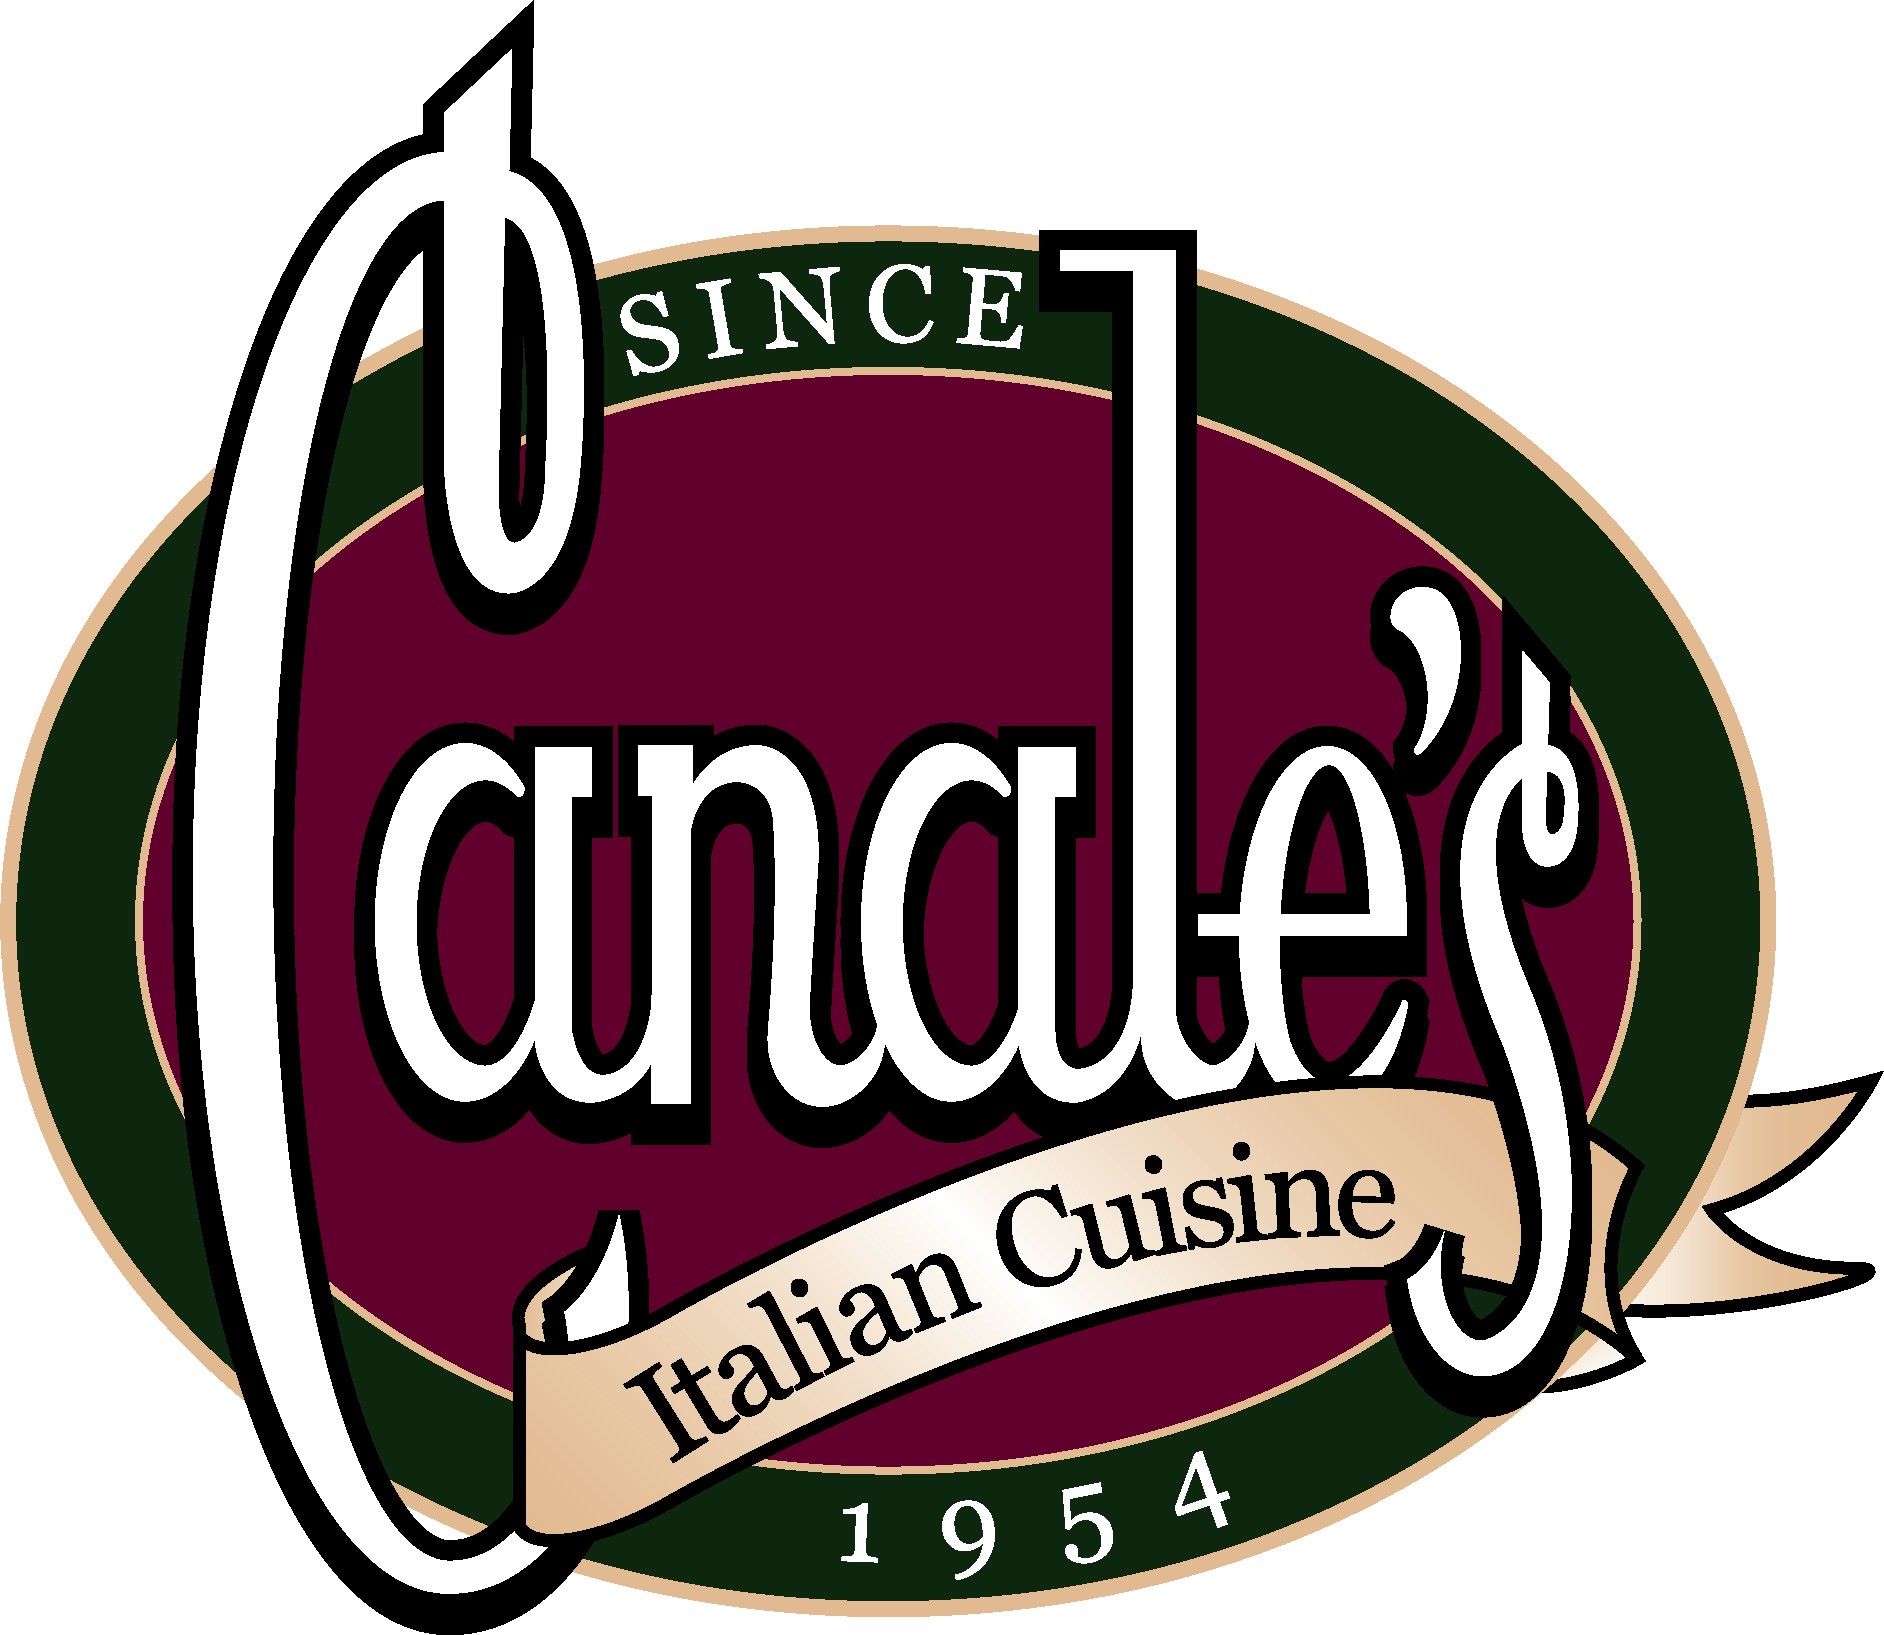 Canale's Restaurant 156 W Utica St